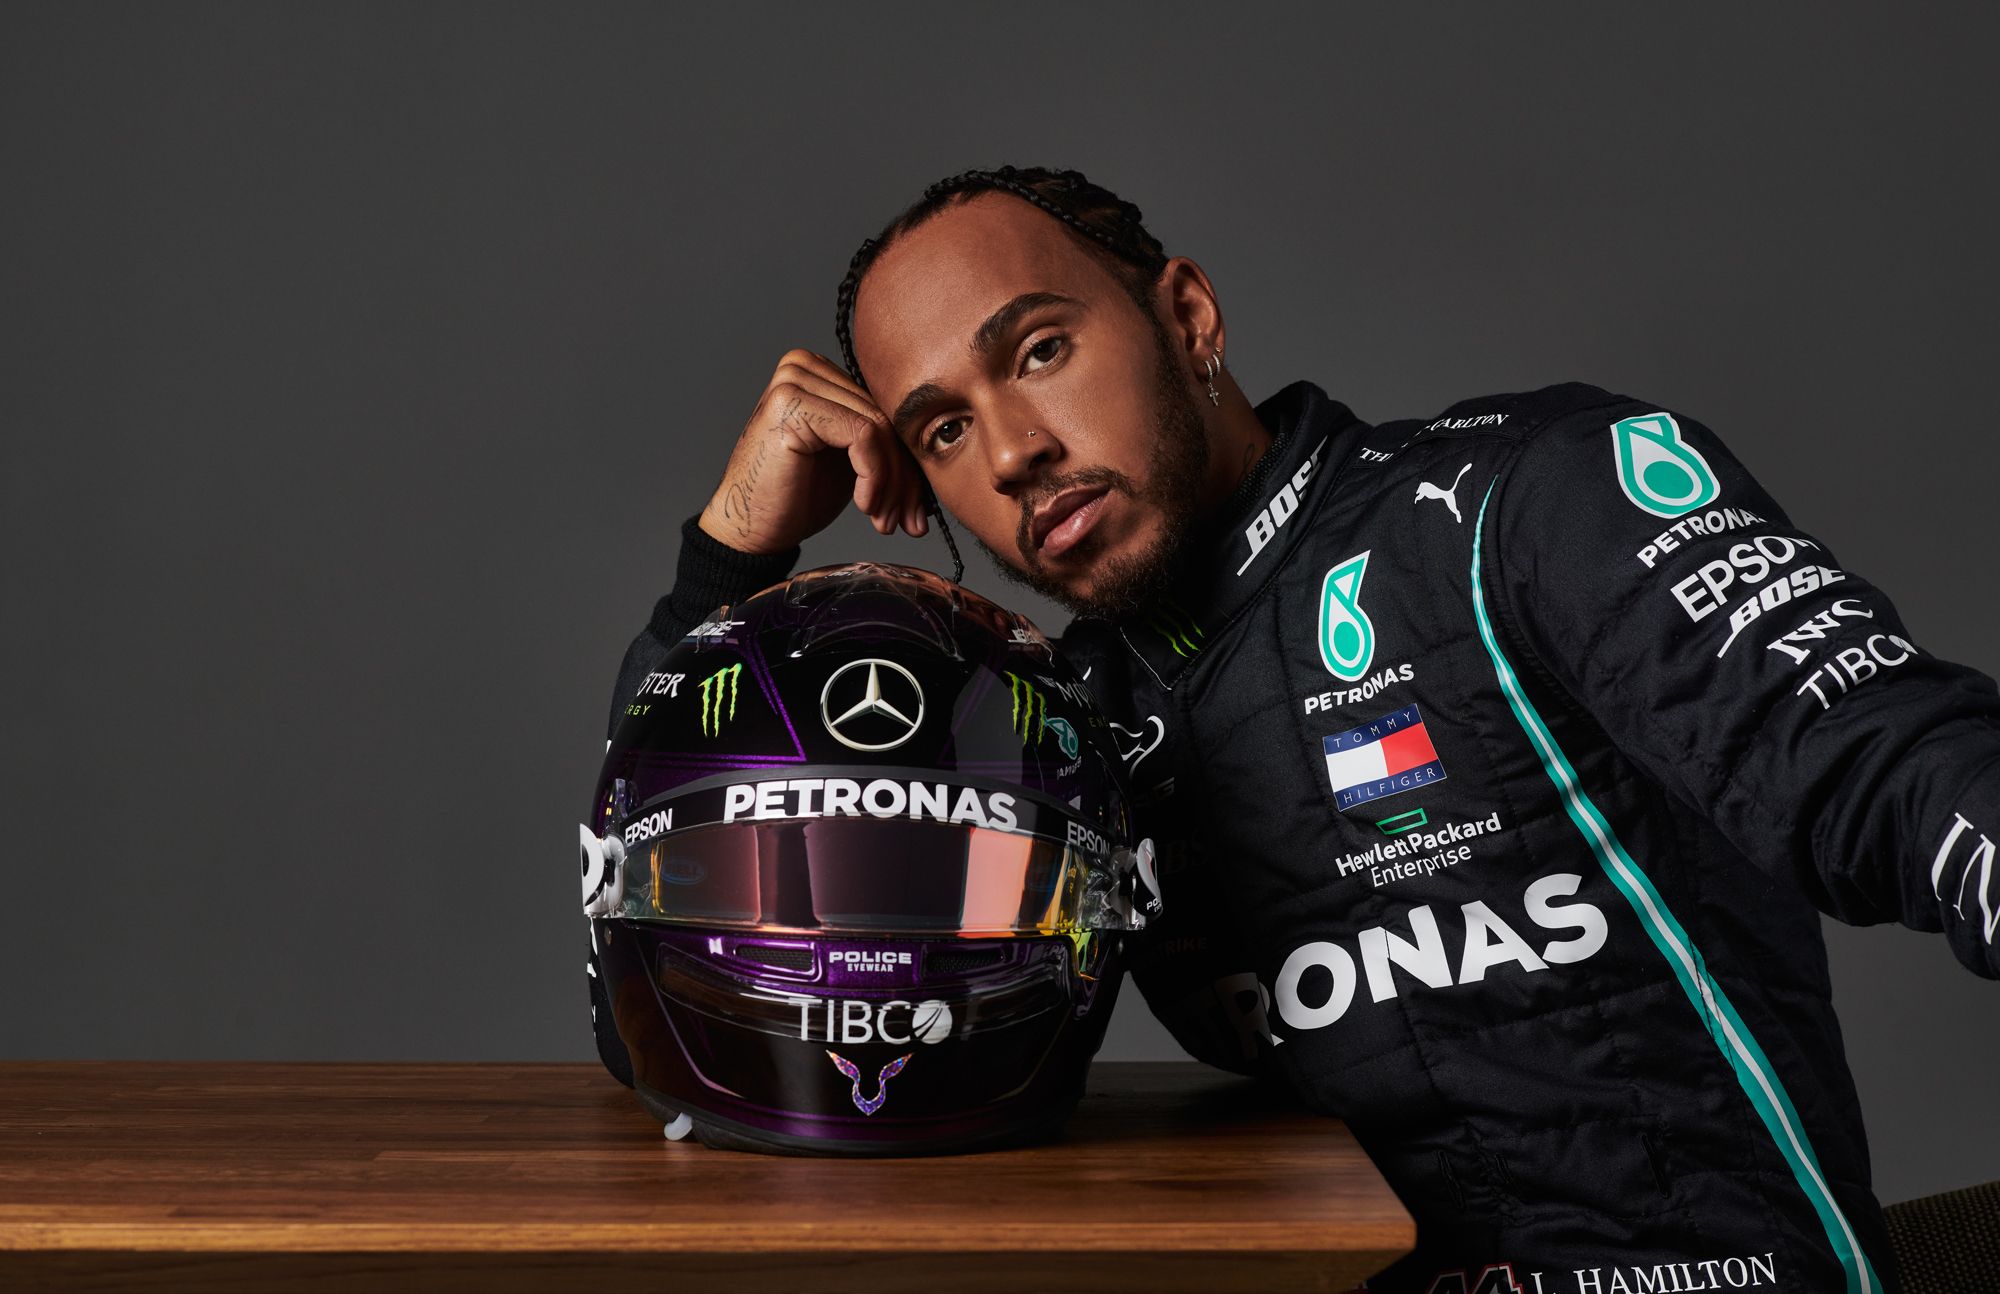 Lewis Hamilton: 'I'm Not Going to Stay Quiet'